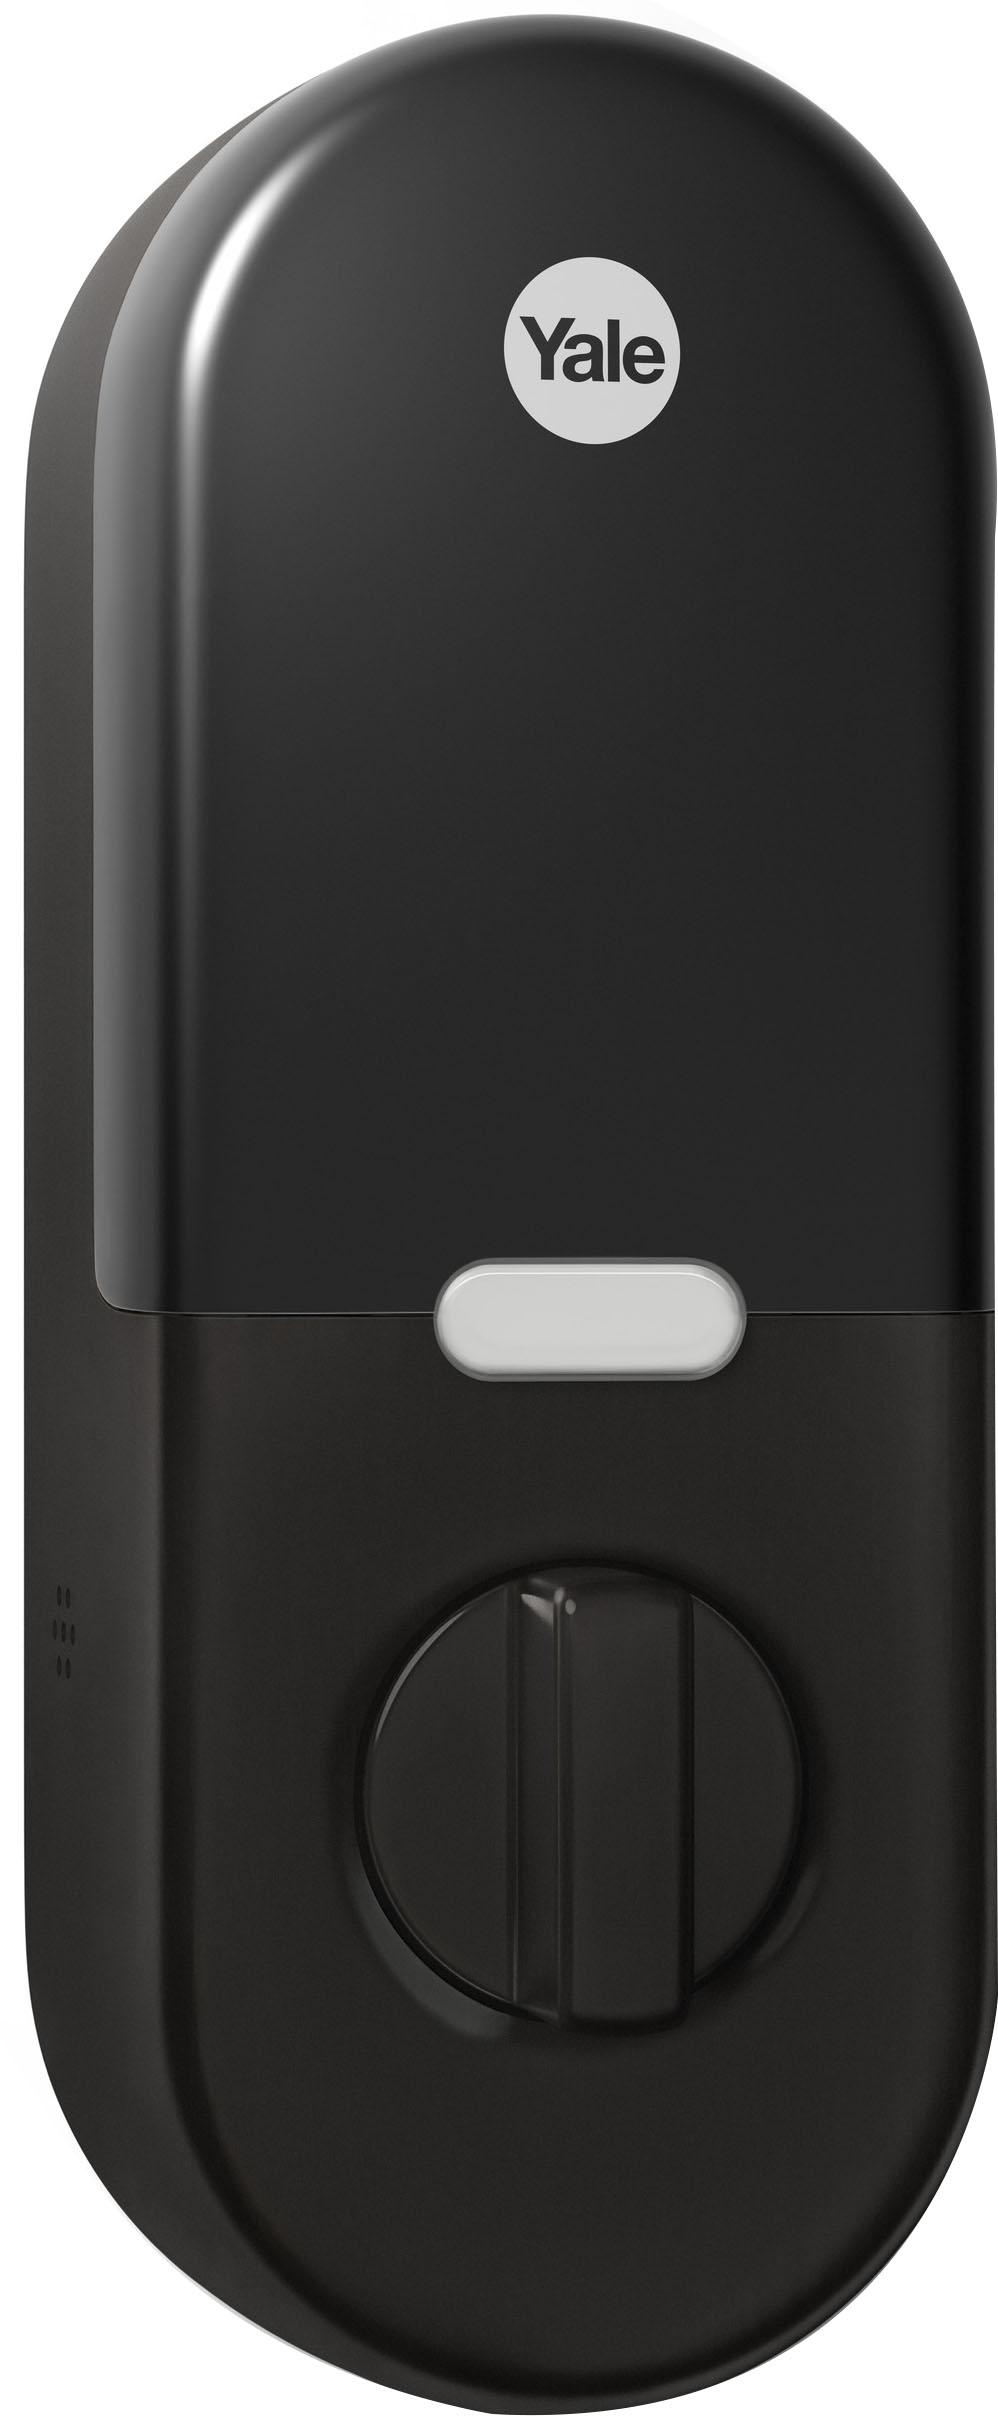 Angle View: Nest x Yale - Smart Lock Wi-Fi Replacement Deadbolt with App/Keypad/Voice assistant Access - Black Suede